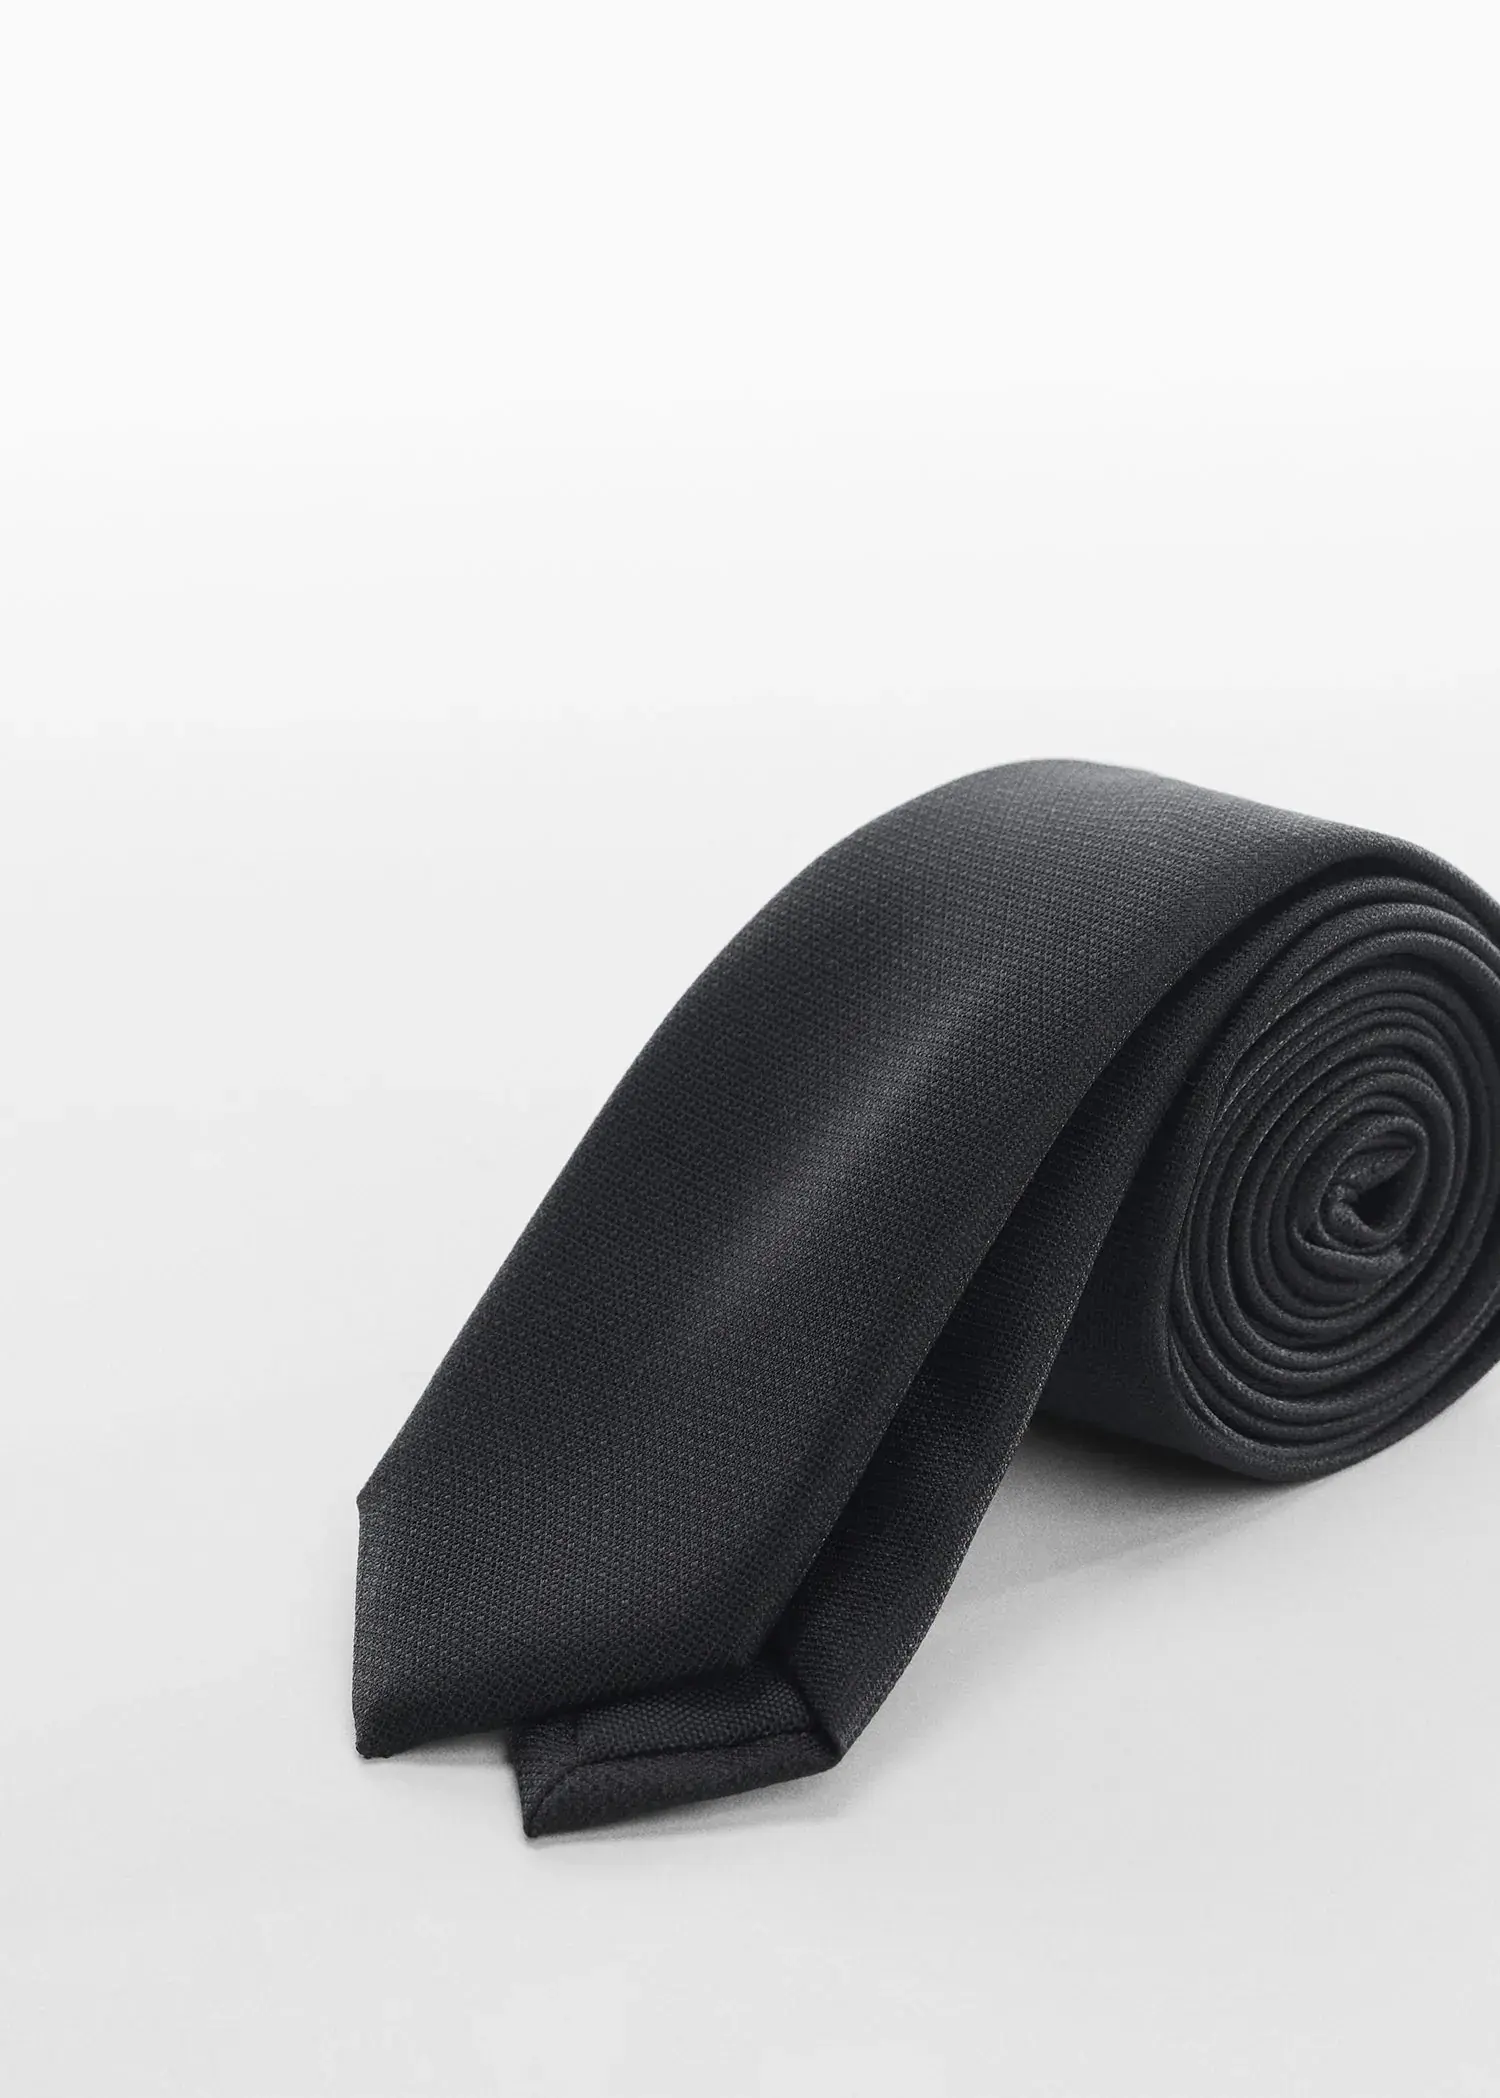 Mango Narrow structured tie. a close up of a tie on a white surface 